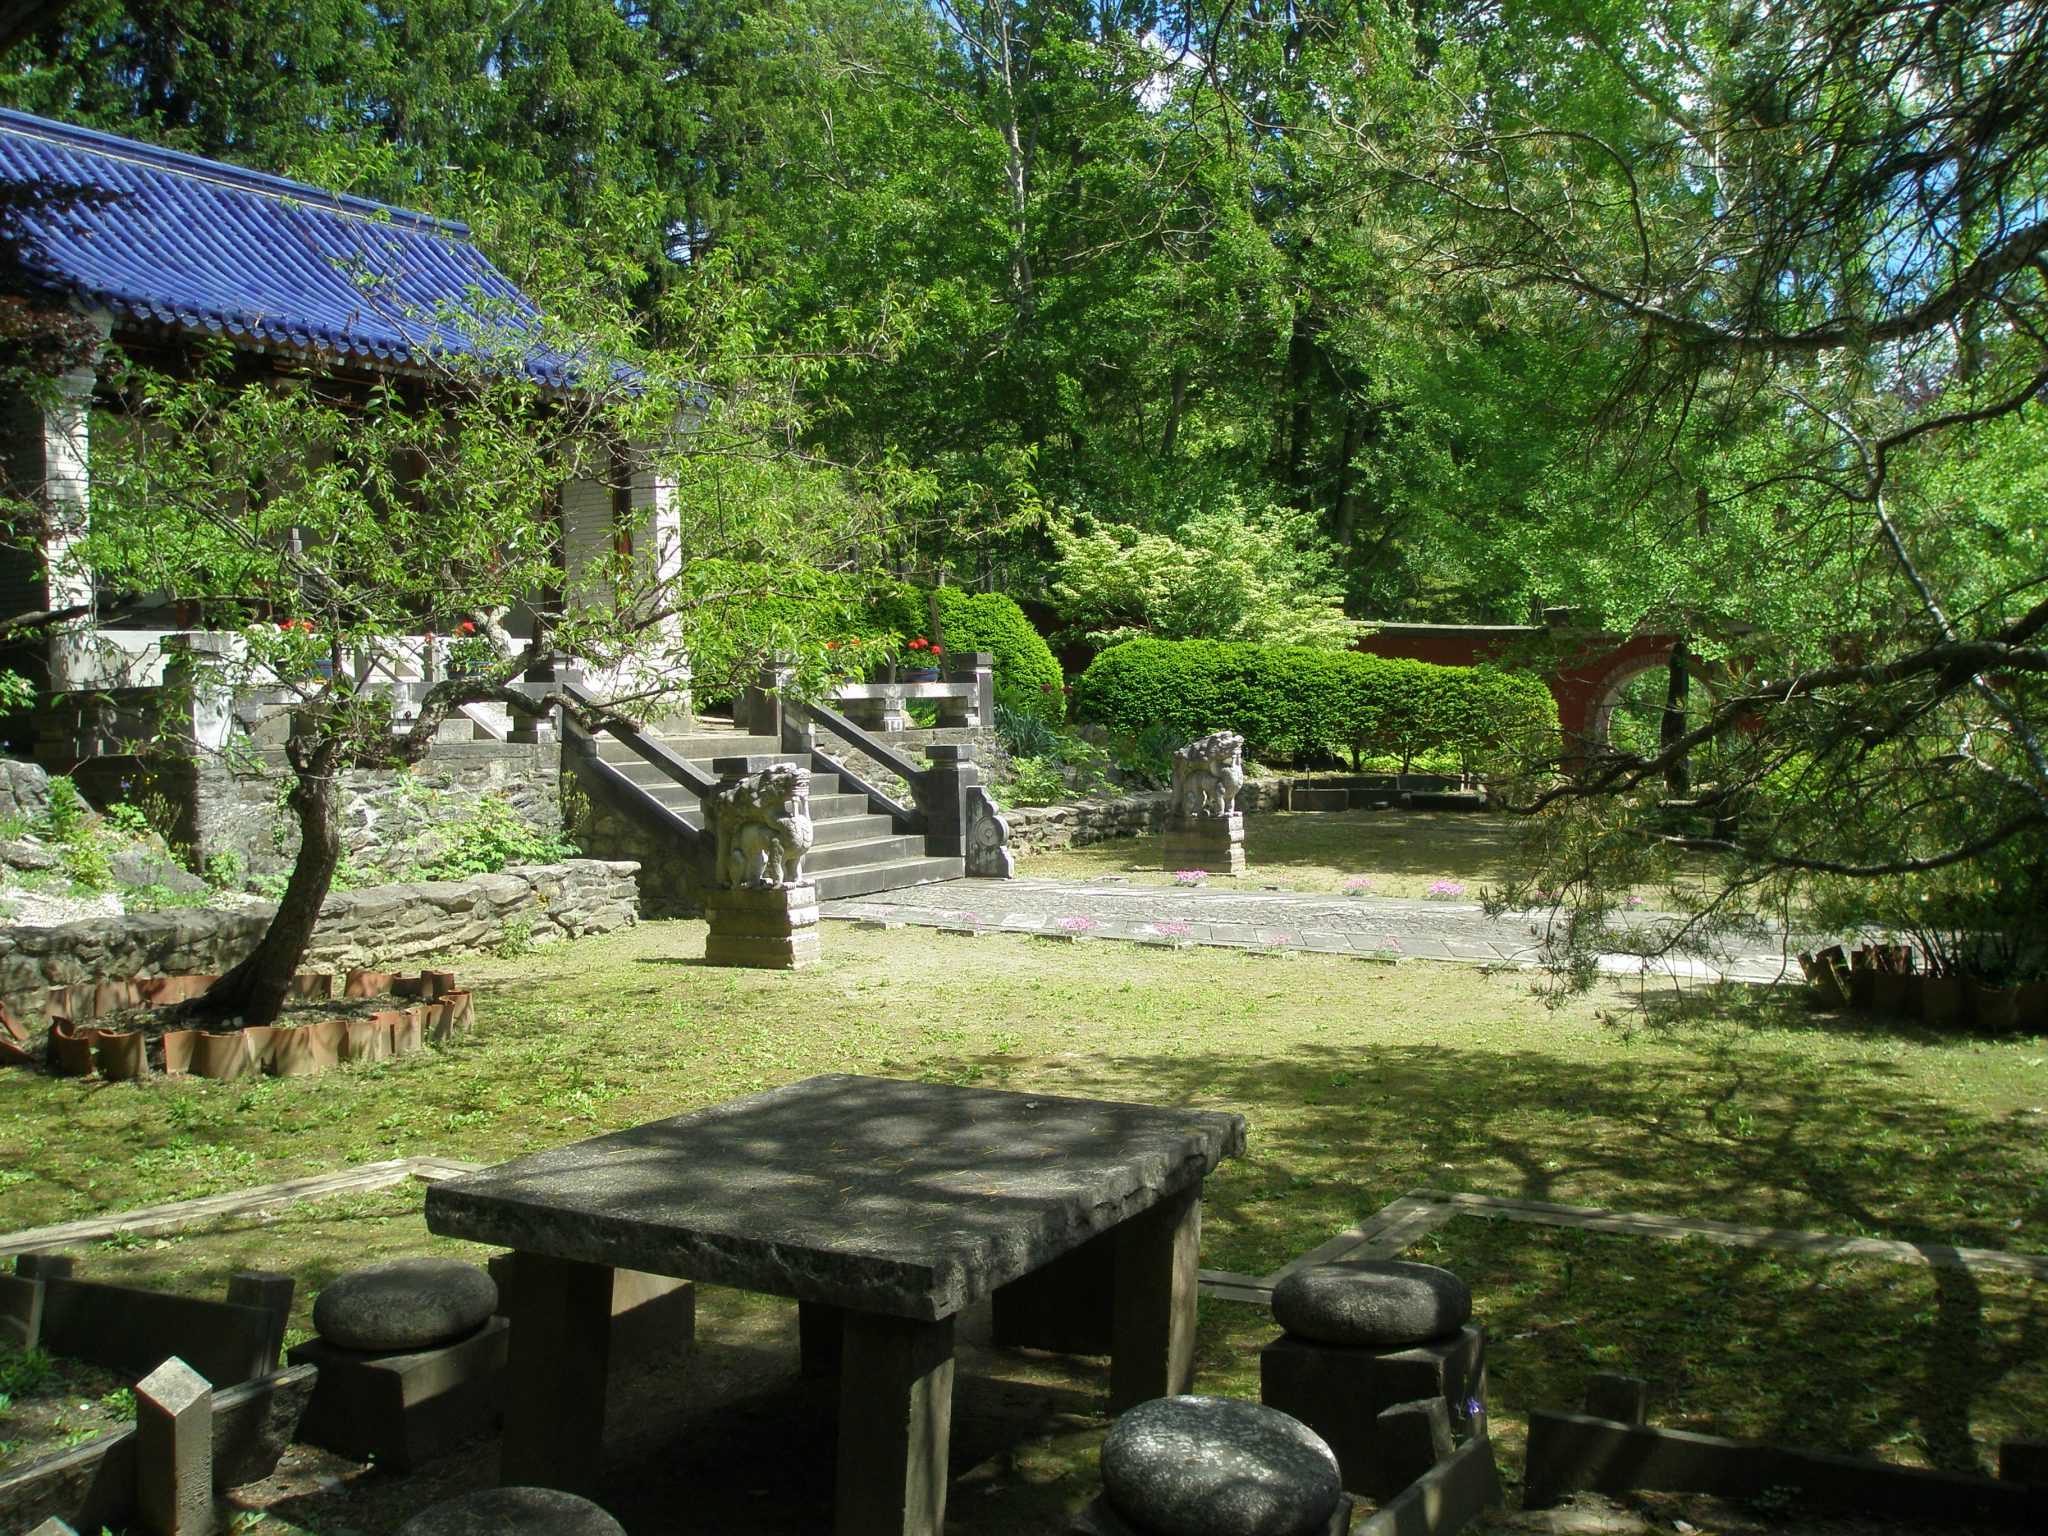 Another view of the Chinese Garden